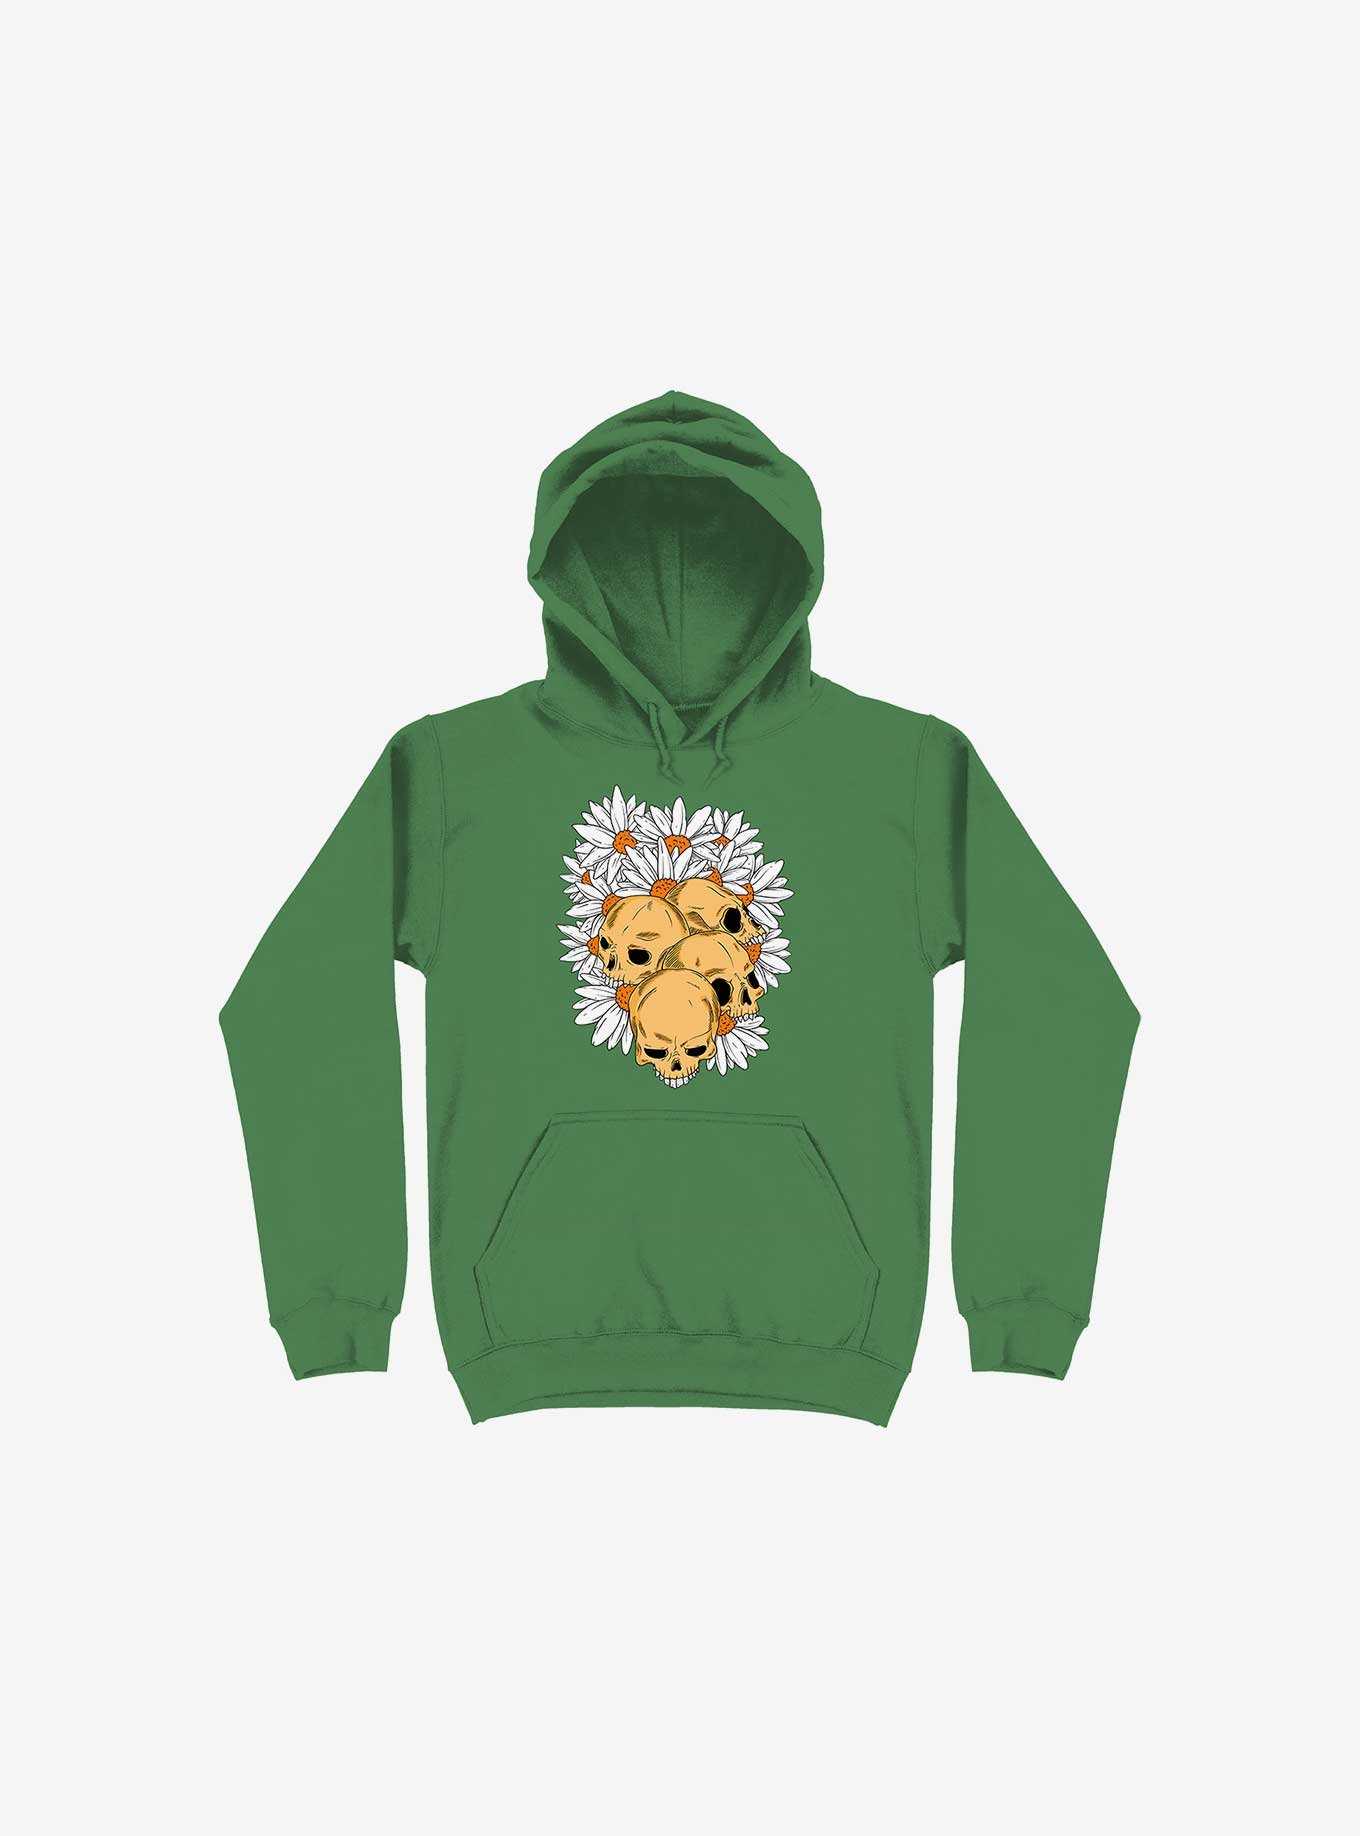 Skull Have Chance Kelly Green Hoodie, , hi-res